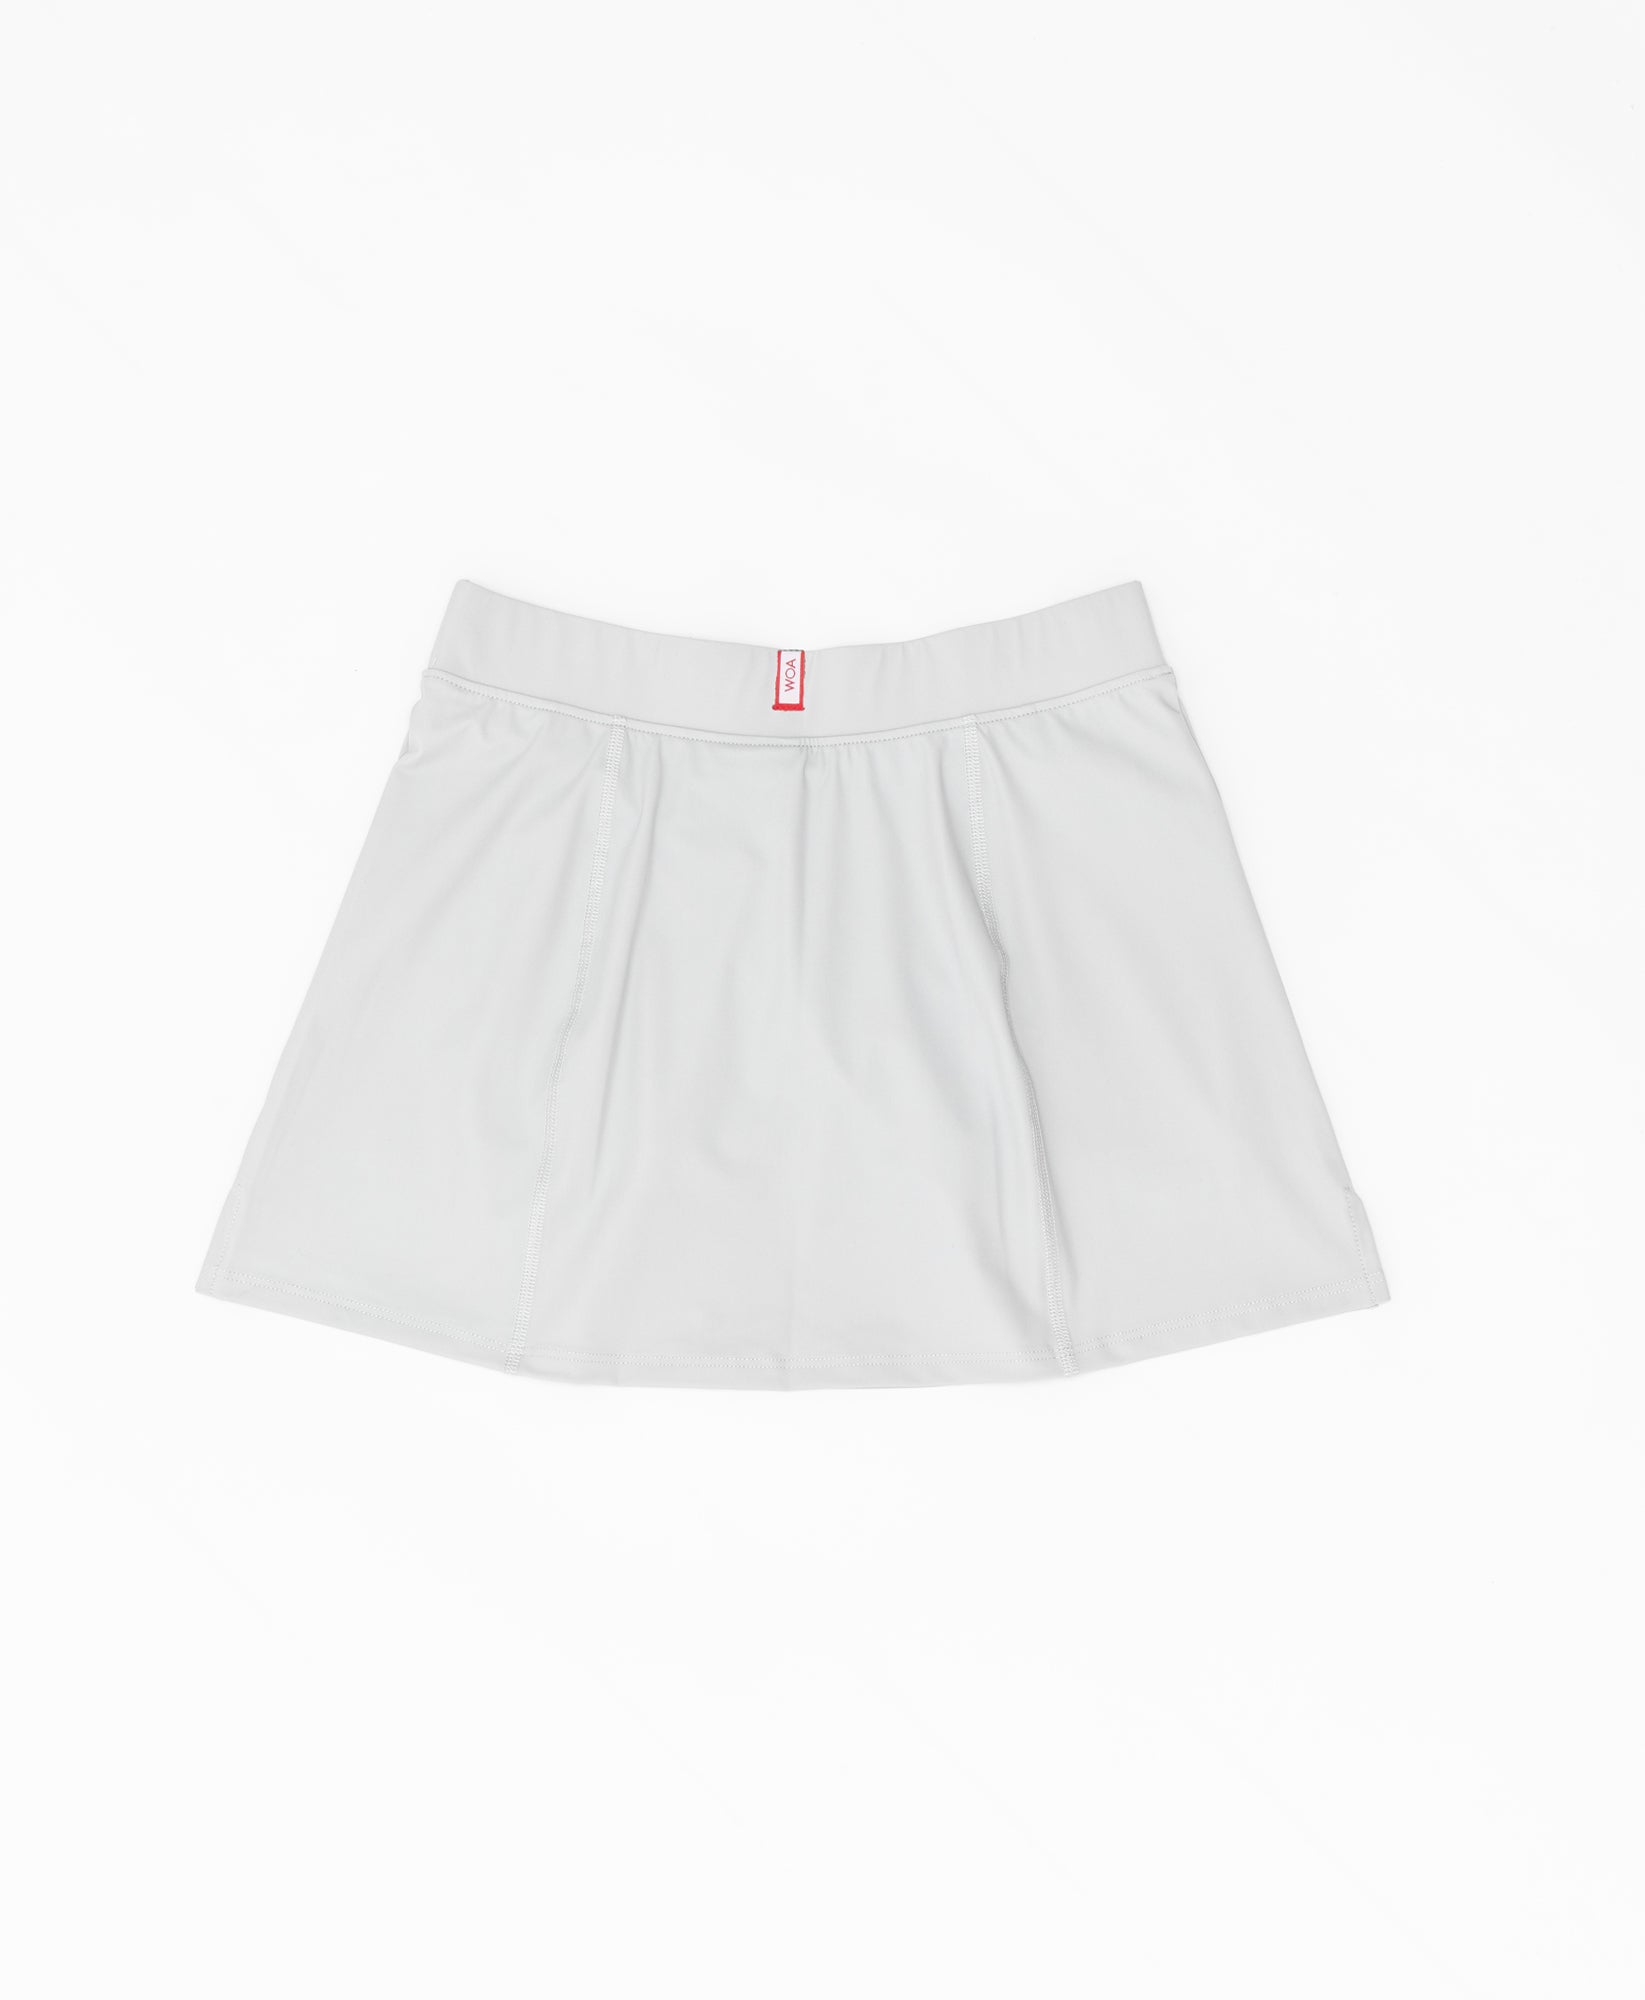 Wear One's At Simple Skort in Cloud White Flat Front